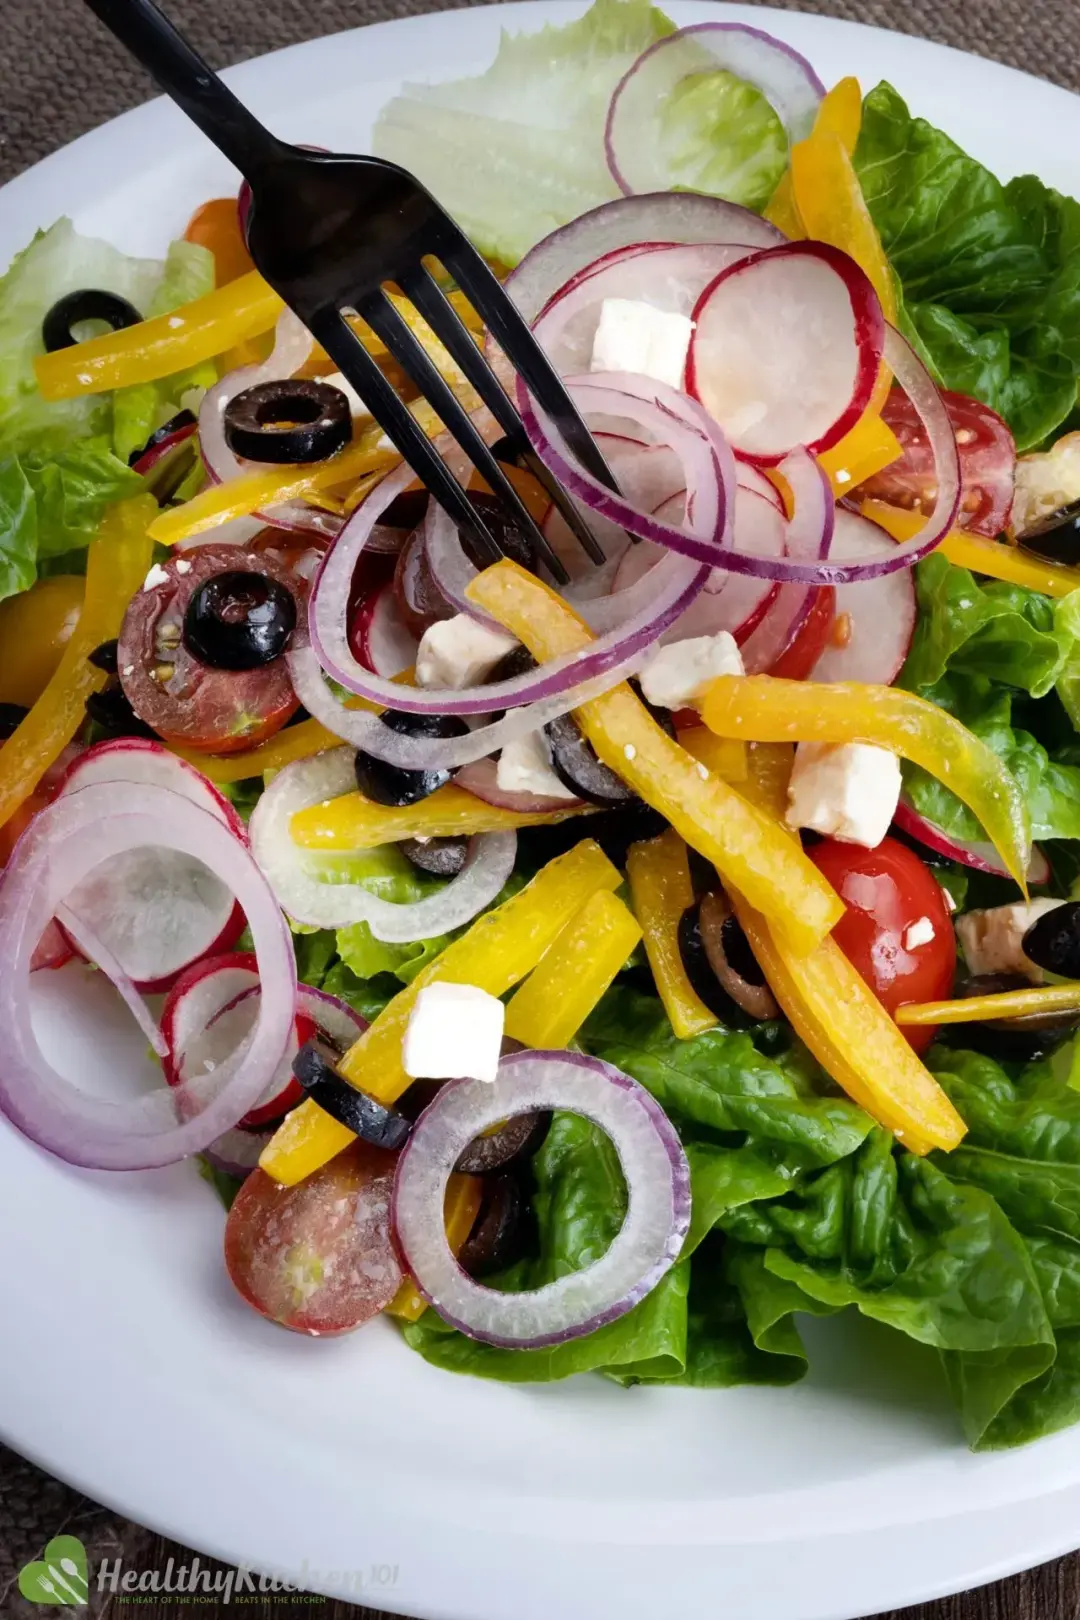 A fork dunked into a dish of Greek salad, full of vegetables of different colors